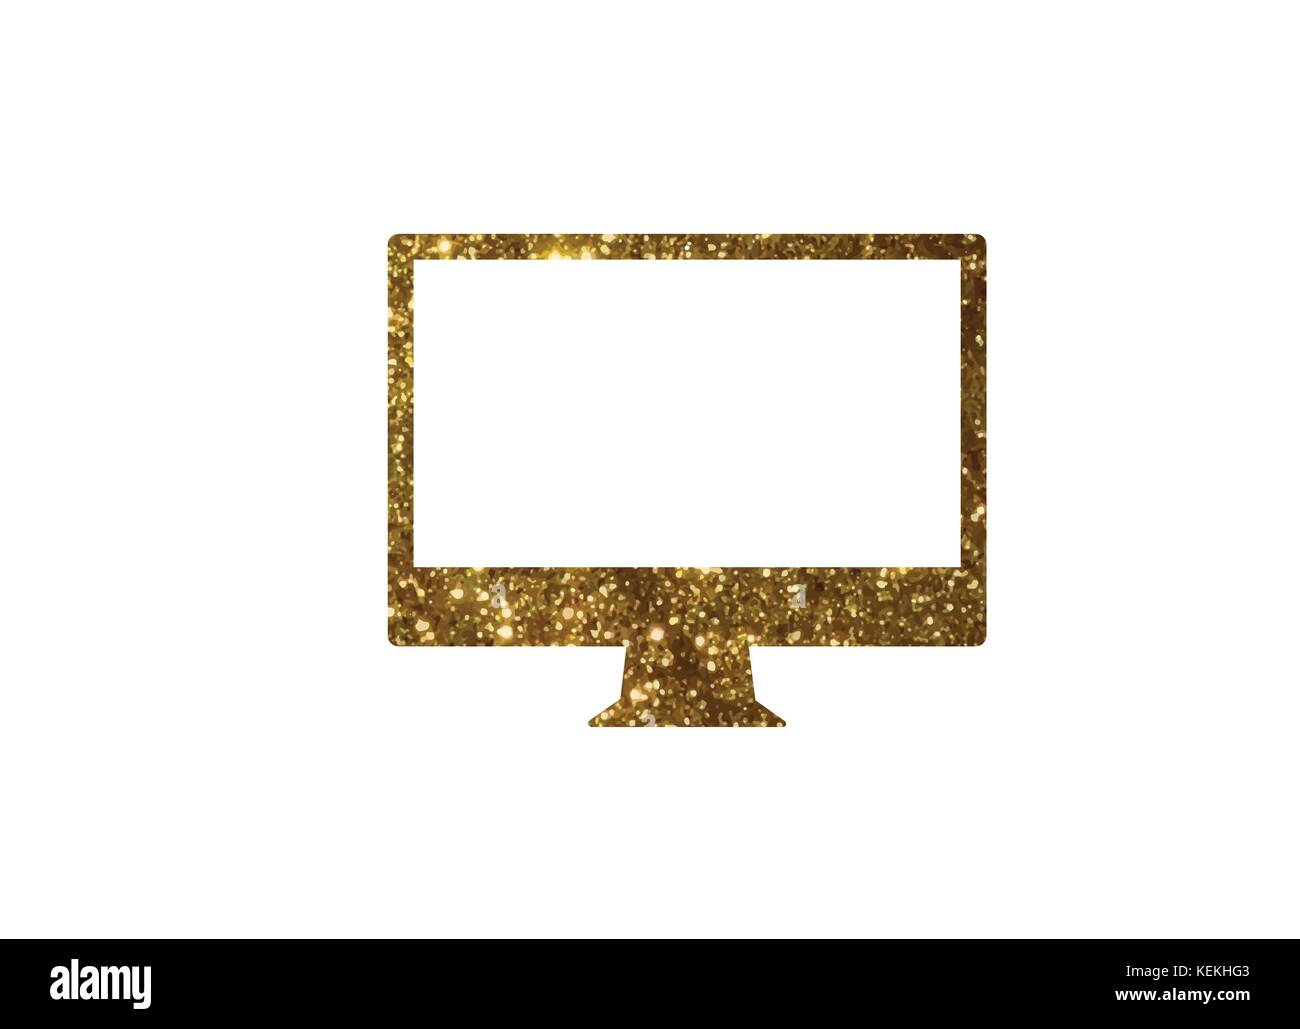 The vector golden glitter gold color flat computer icon on white background Stock Vector